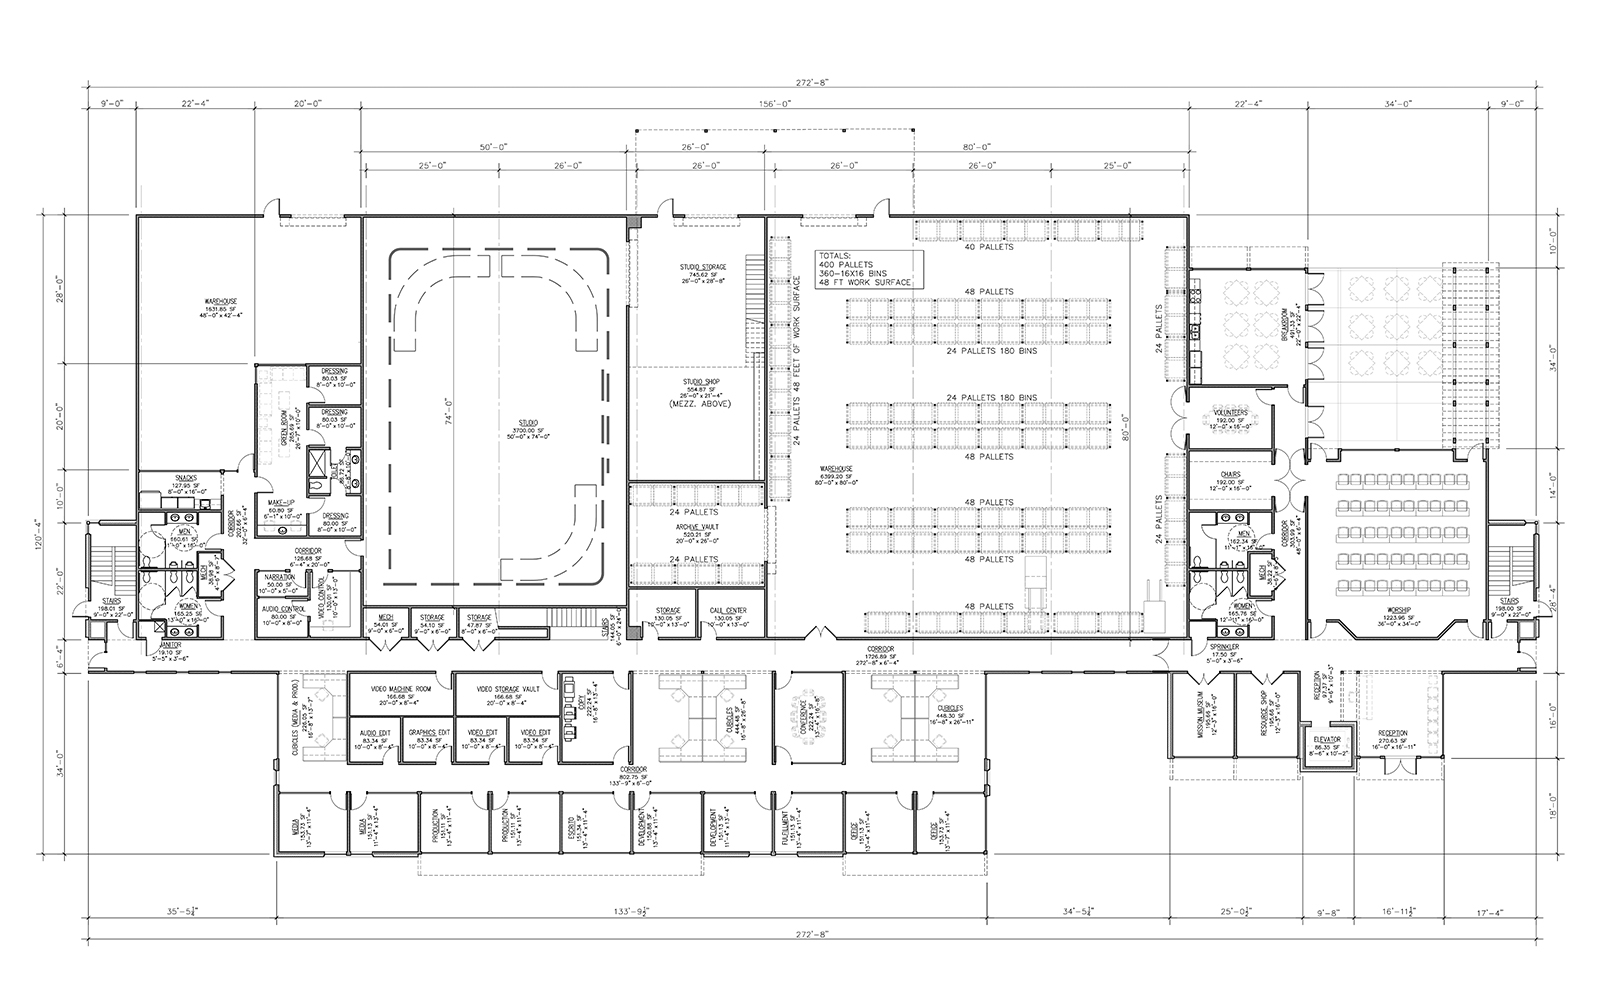 Building plans showing the main floor